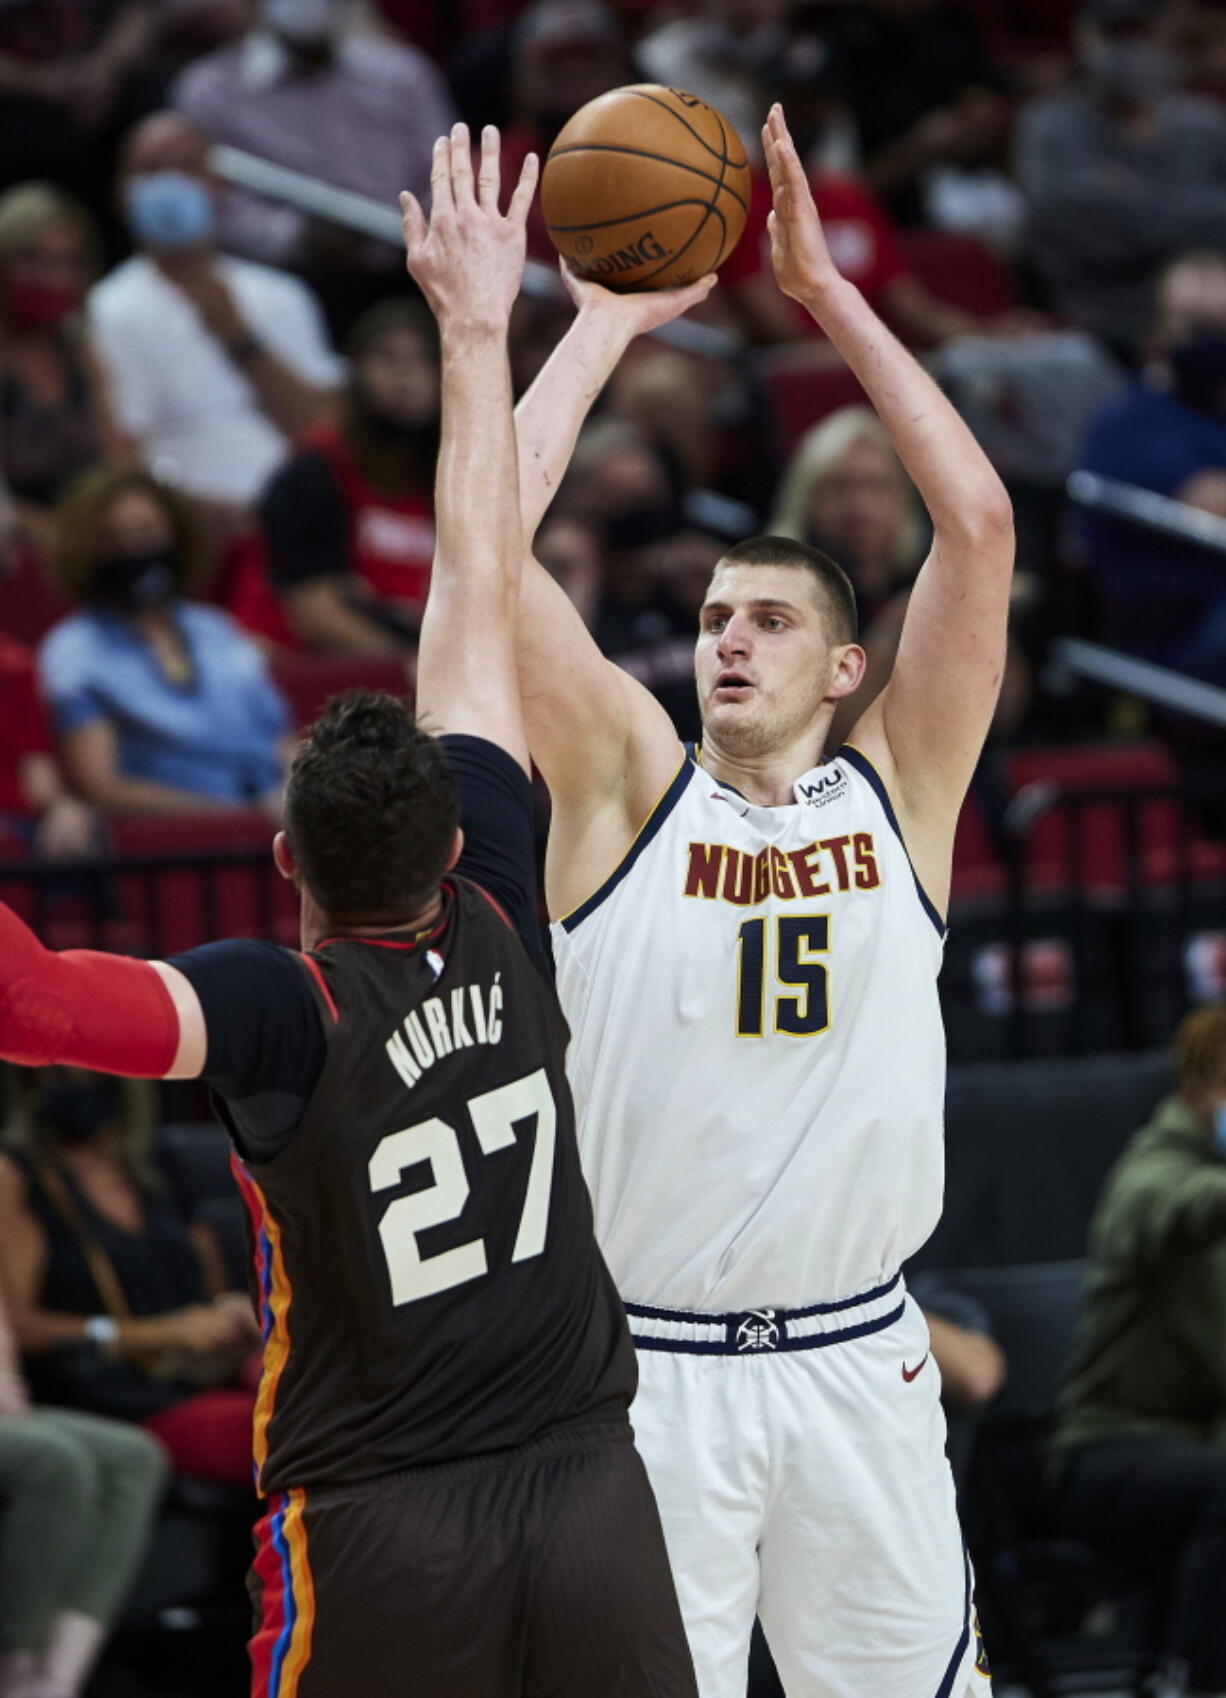 Denver Nuggets center Nikola Jokic shoots over Portland Trail Blazers center Jusuf Nurkic during the first half of Game 6 of an NBA basketball first-round playoff series Thursday, June 3, 2021, in Portland, Ore.